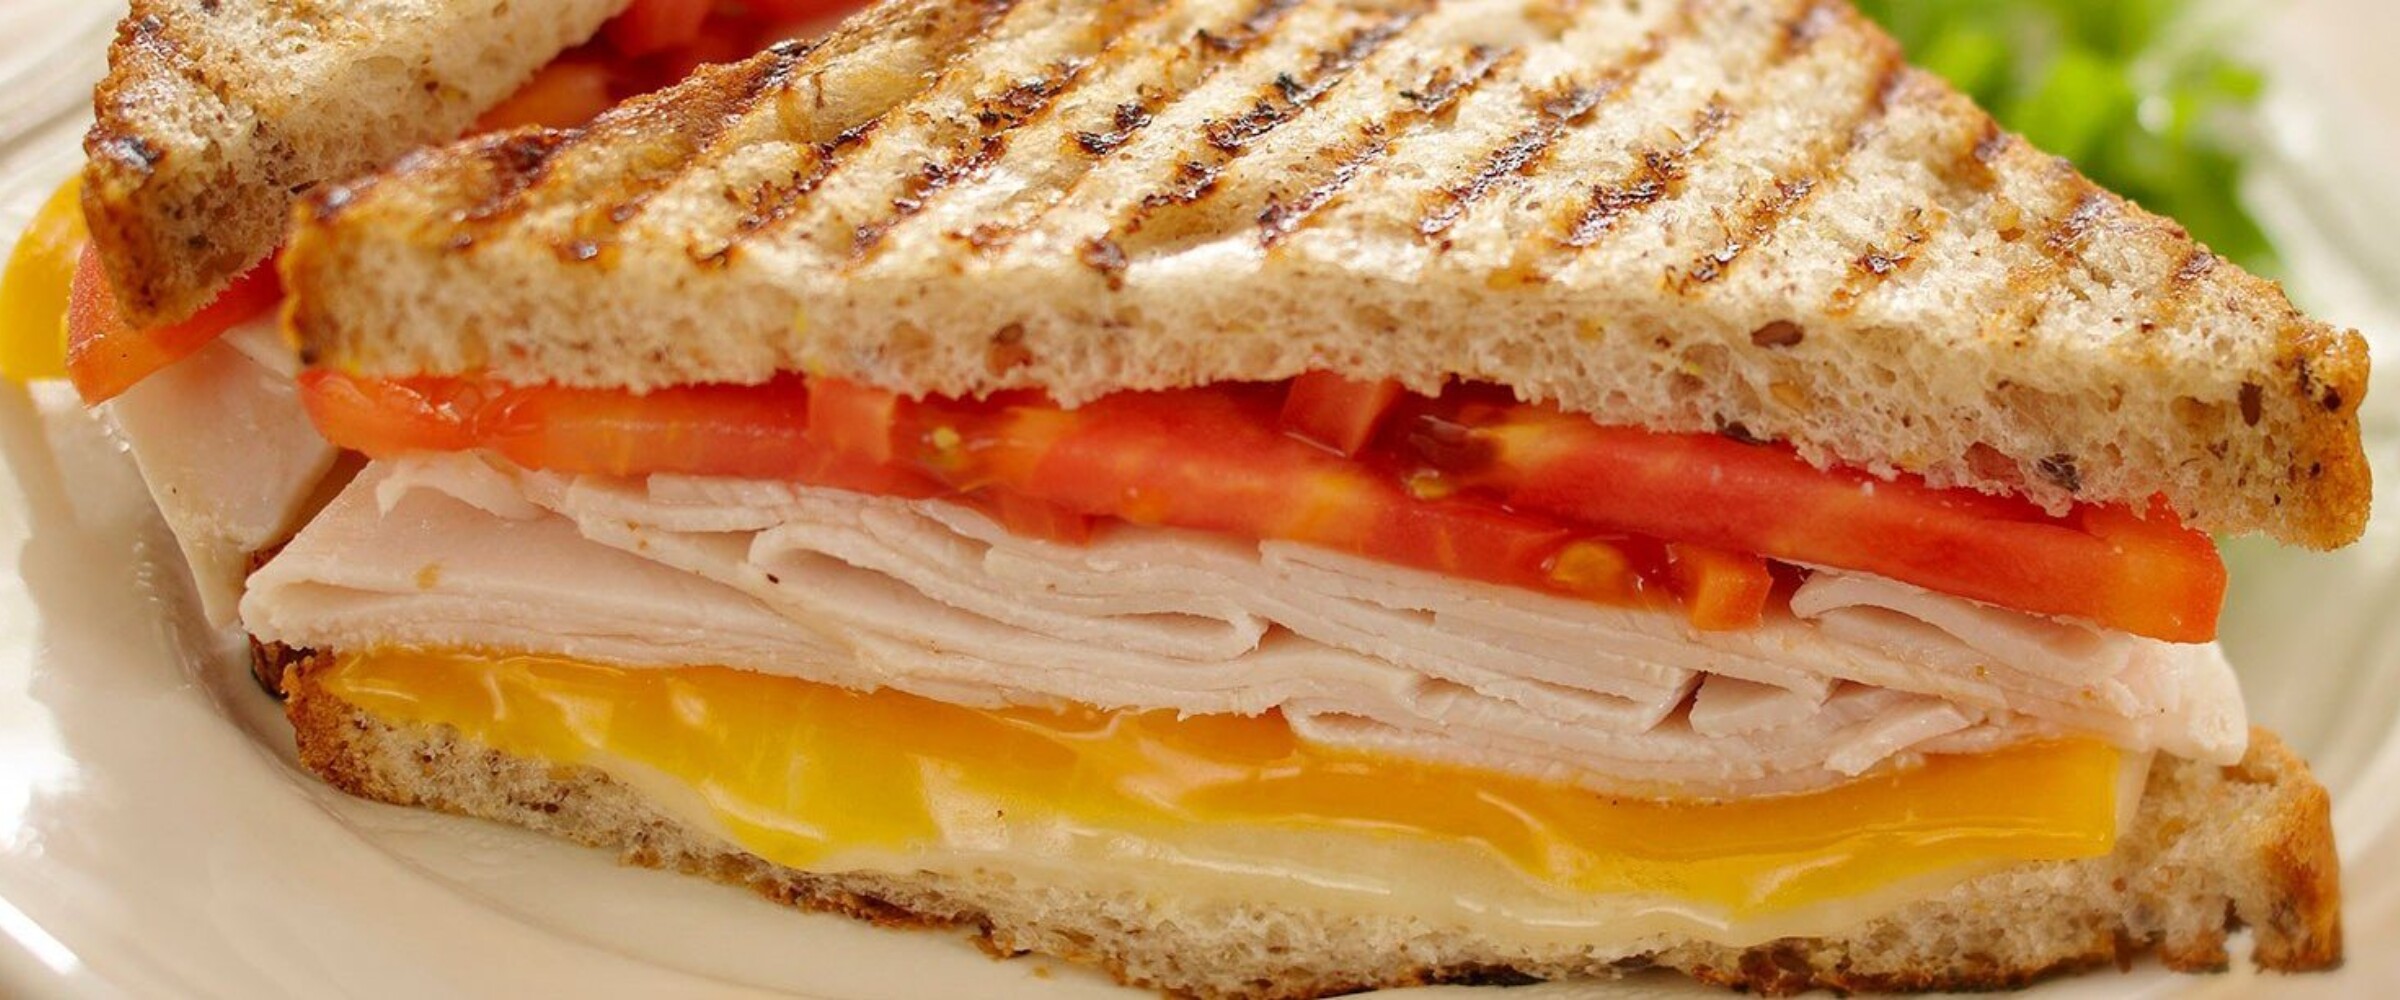 Grilled cheese with turkey